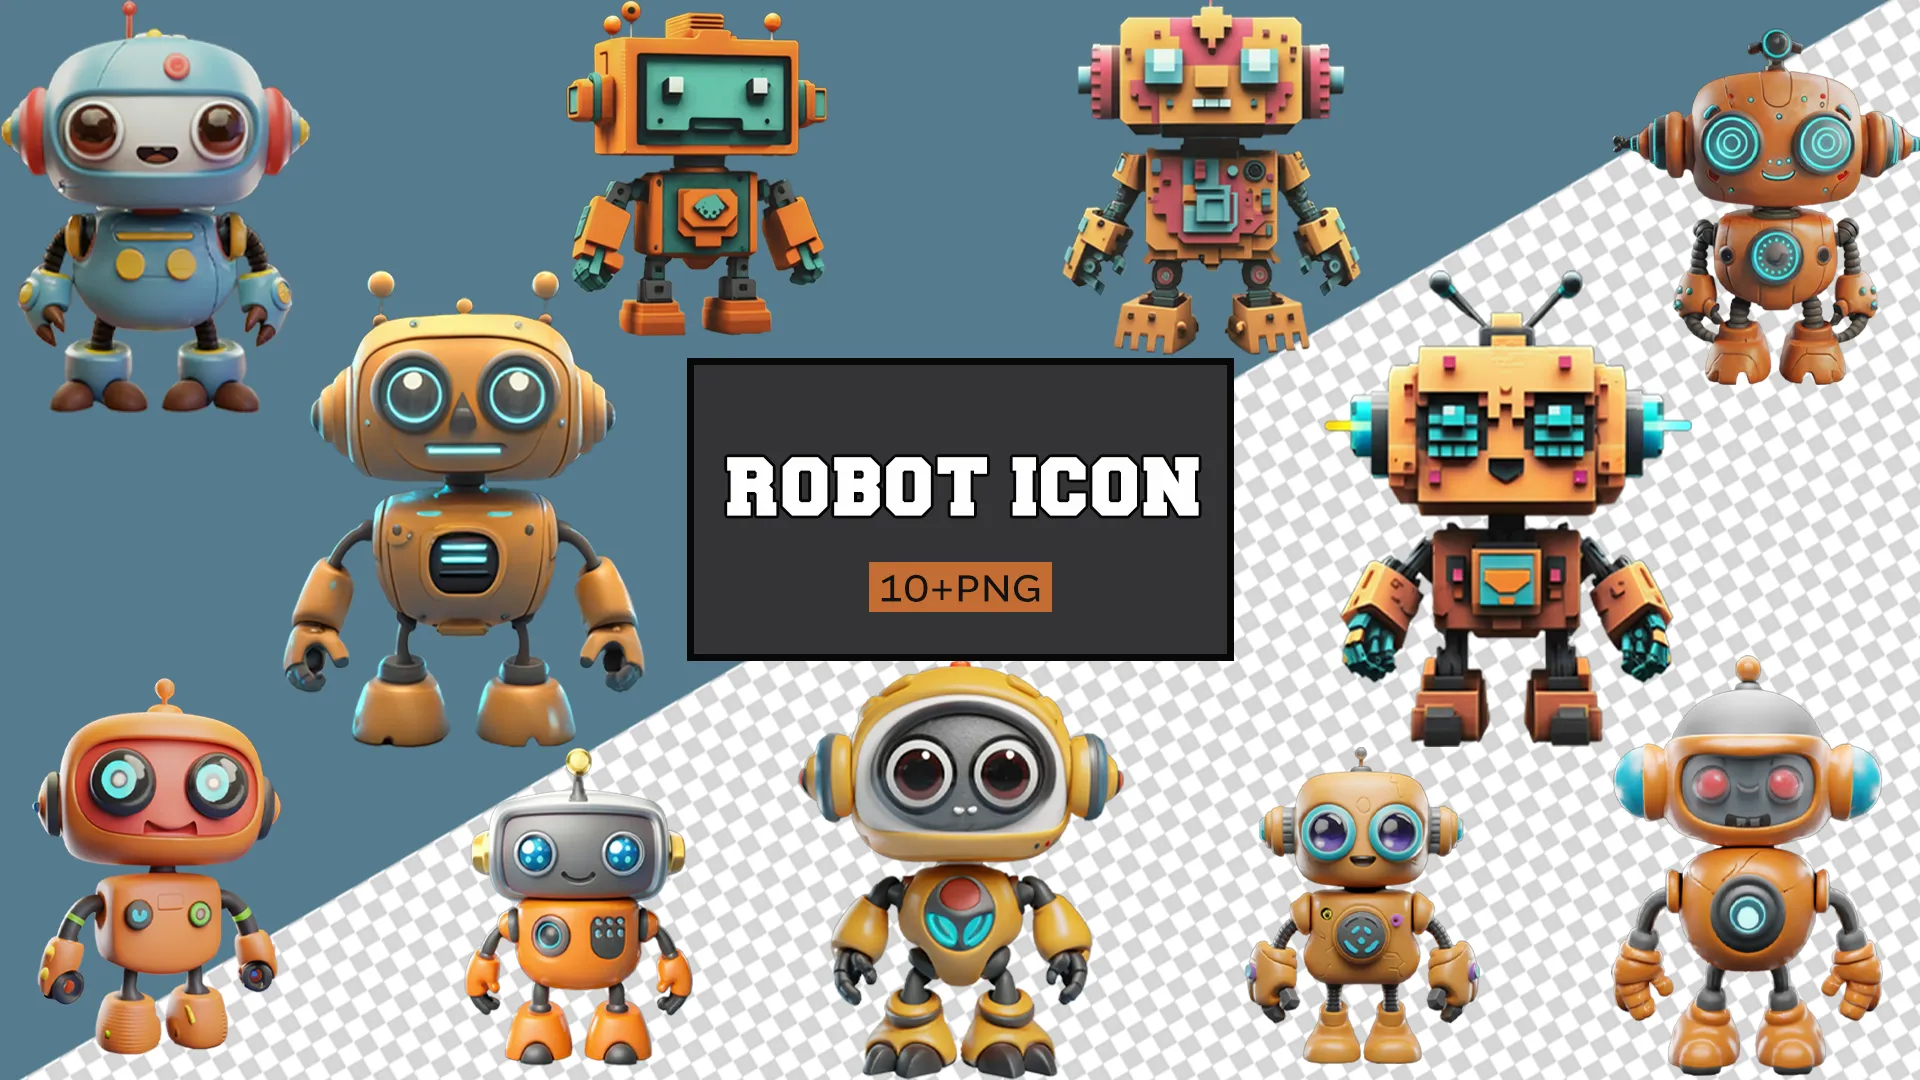 Futuristic Robot Friends 3D Pack for Tech Projects